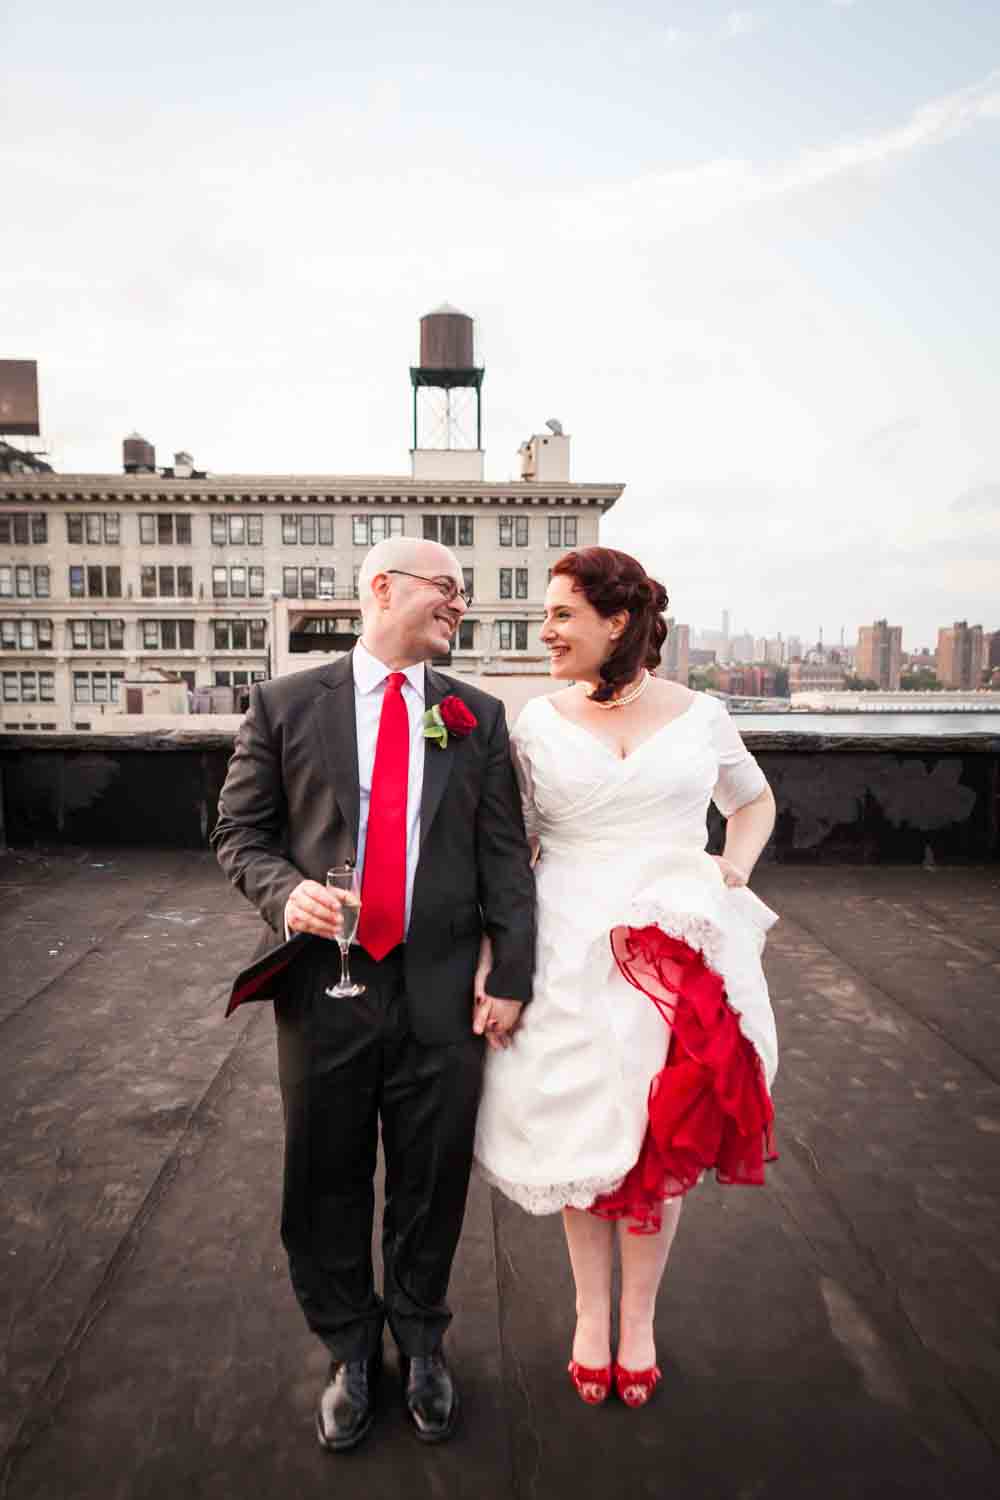 Bride and groom jumping on rooftop at a DUMBO wedding